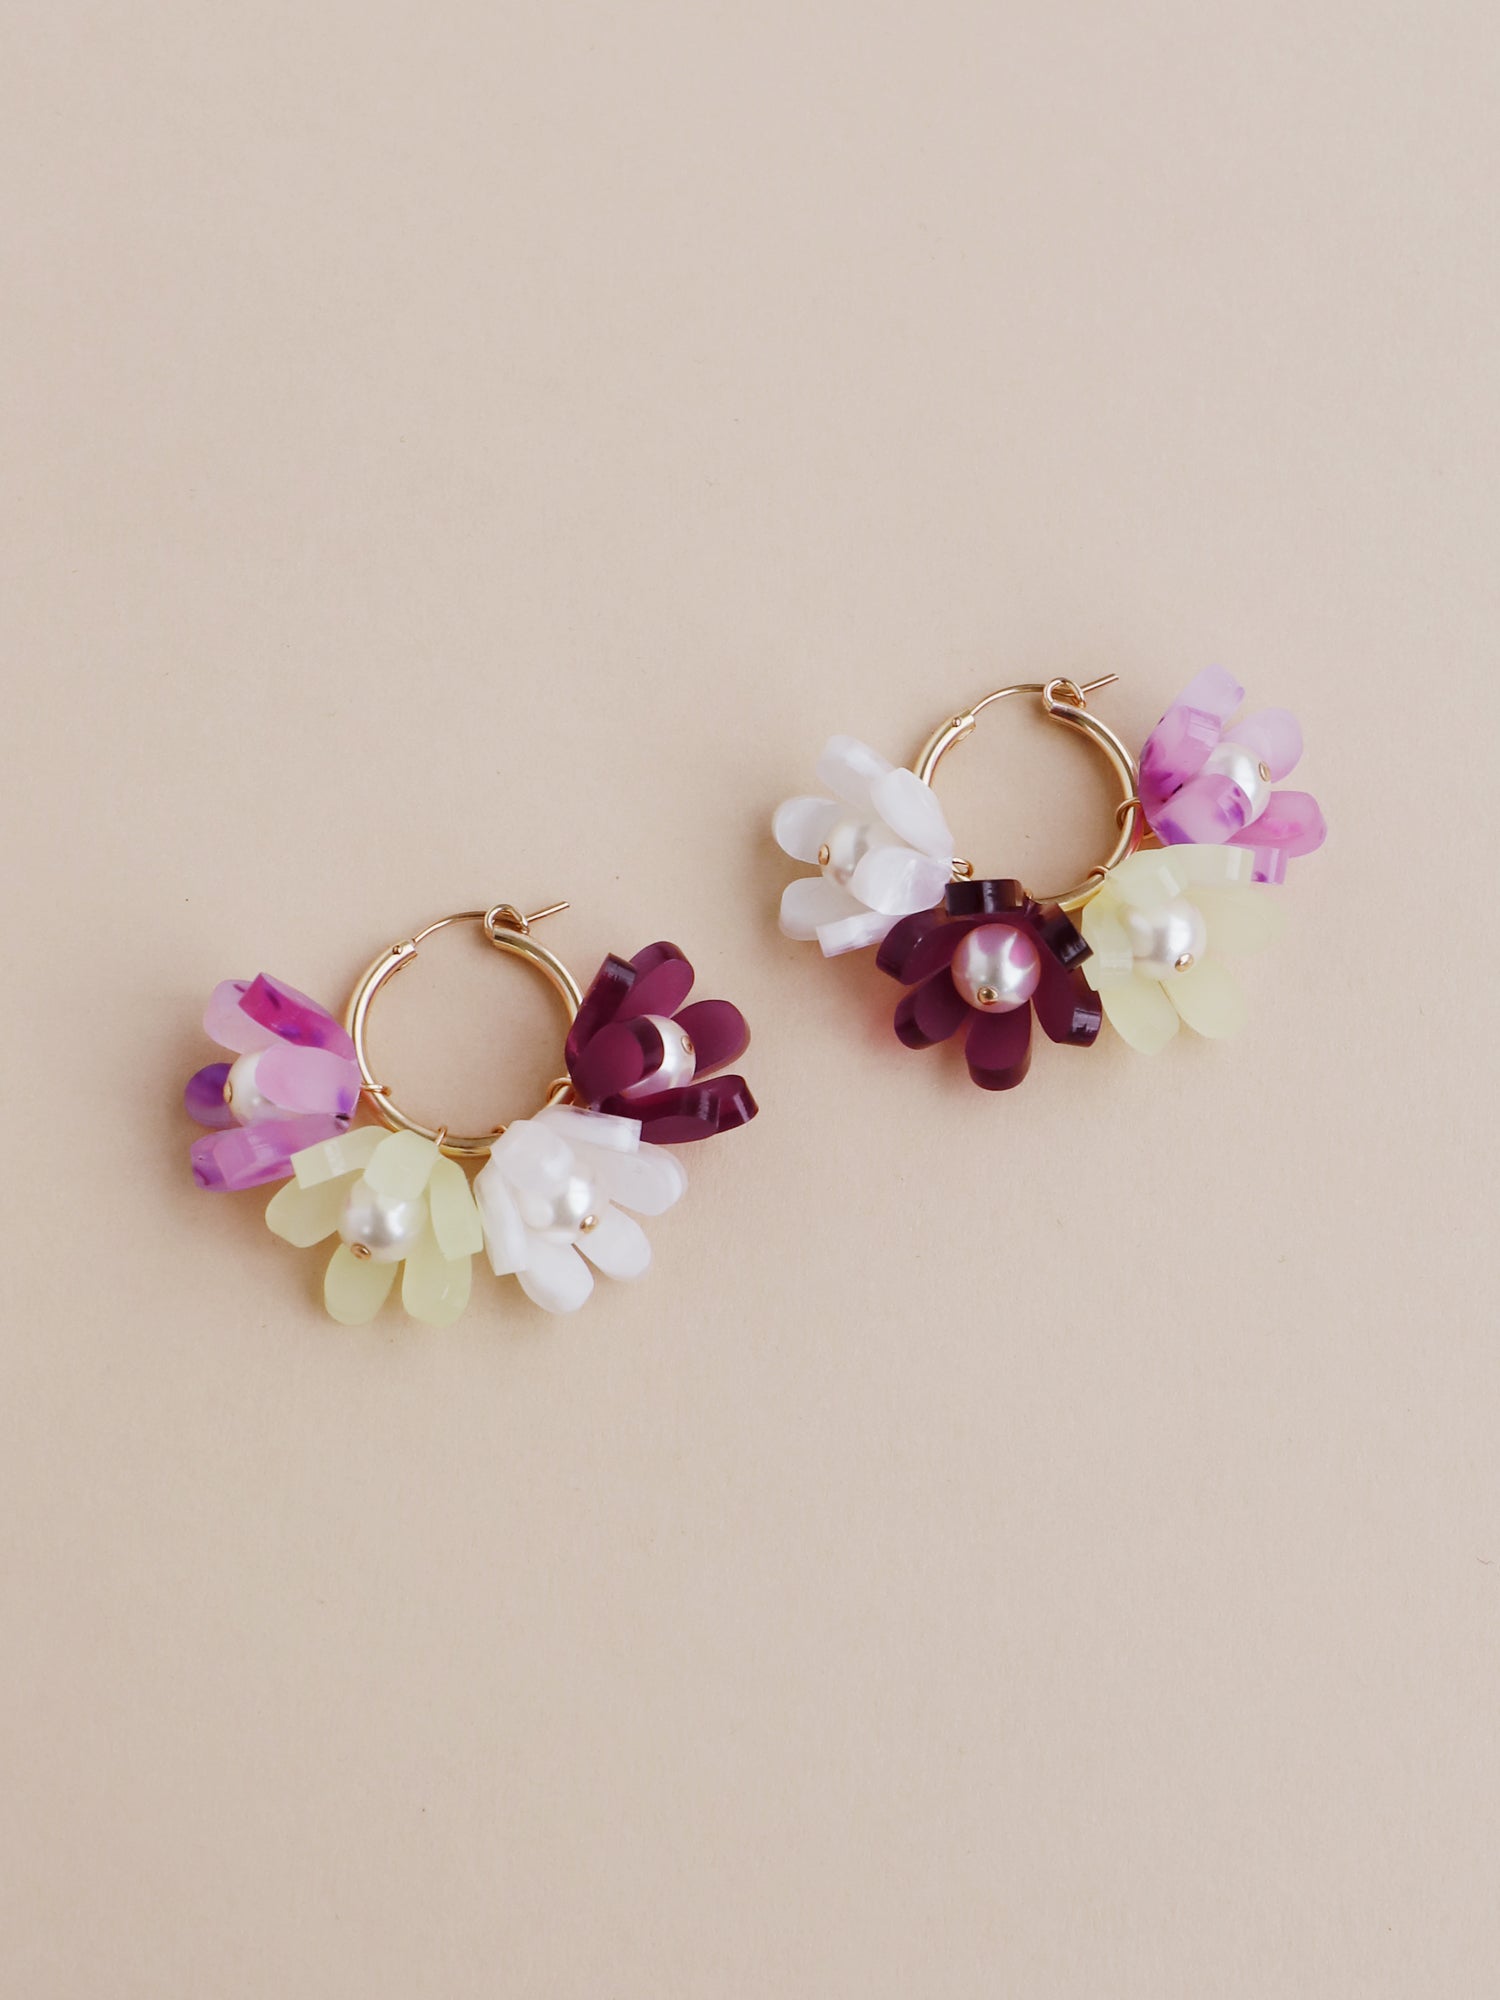 Statement tulip meadow hoop earrings with 8 interchangeable flowers in cream, white and purple shades. Made from heat-formed acrylic with high quality glass pearls and 14k gold-filled findings. Handmade in the UK by Wolf & Moon.